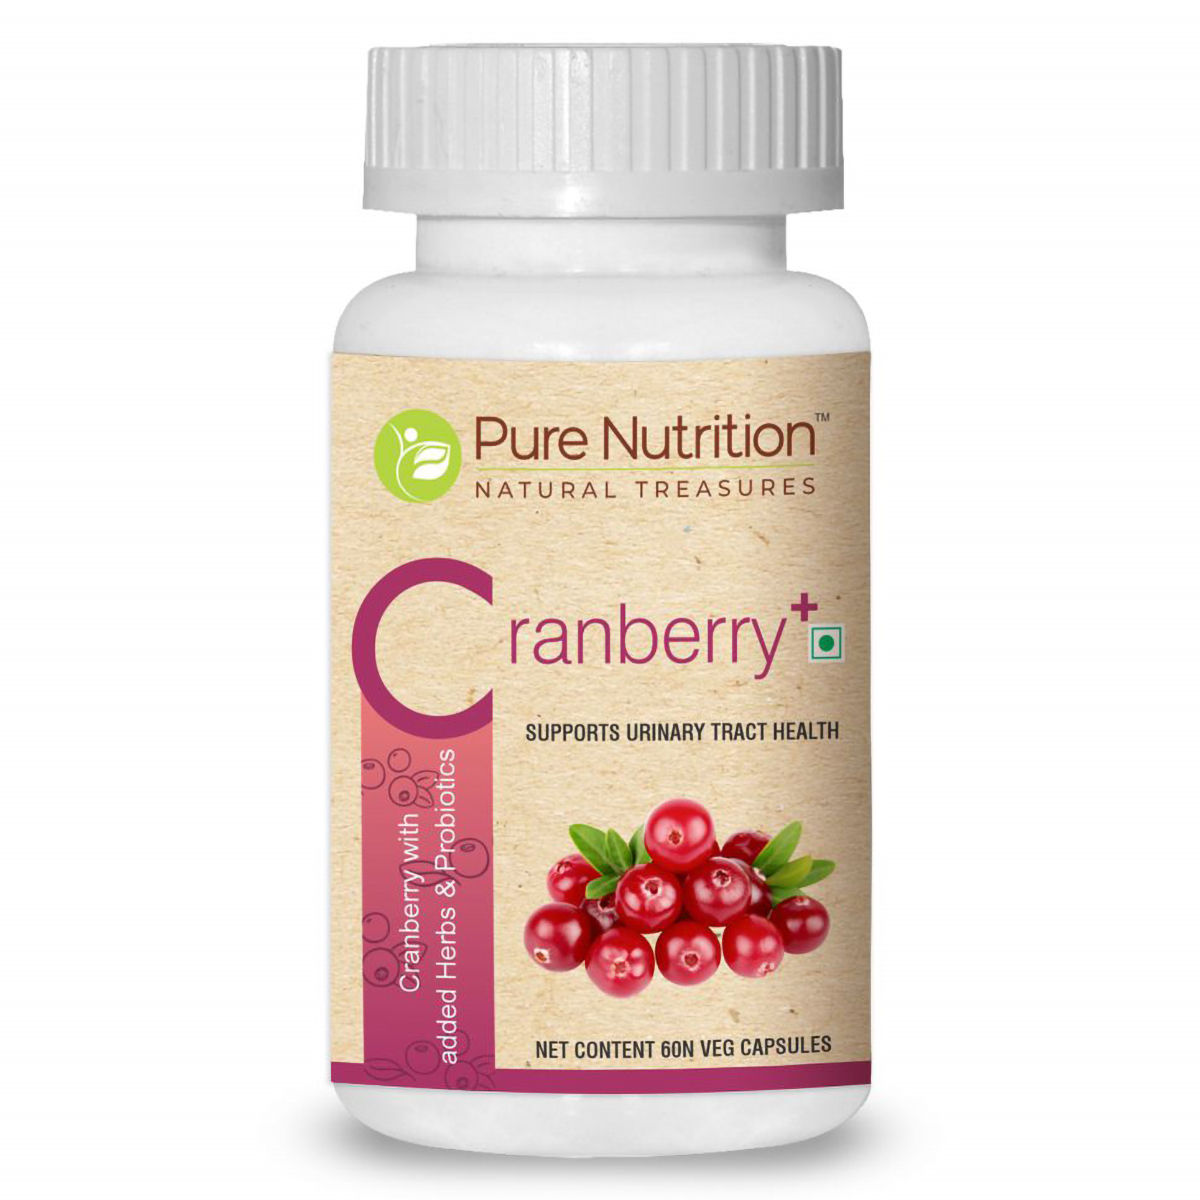 Buy Pure Nutrition Cranberry Plus 620 mg, 60 Capsules Online